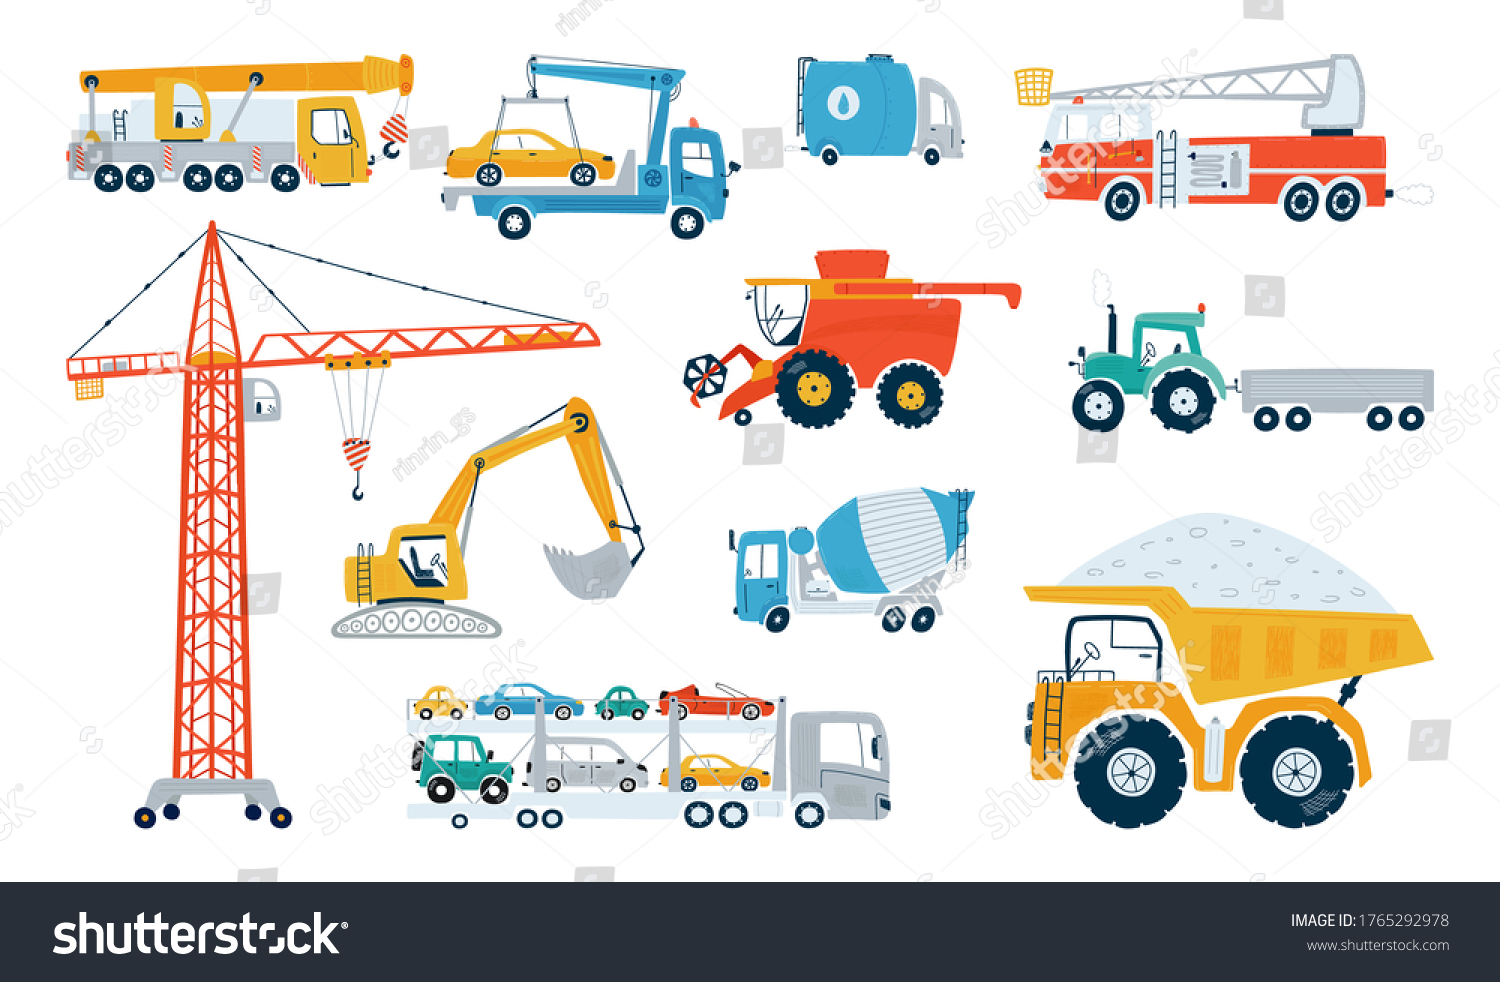 SVG of Set working building machine isolated on a white background. Icons kids cars for design of children's rooms, clothing, textiles. Vector illustration svg